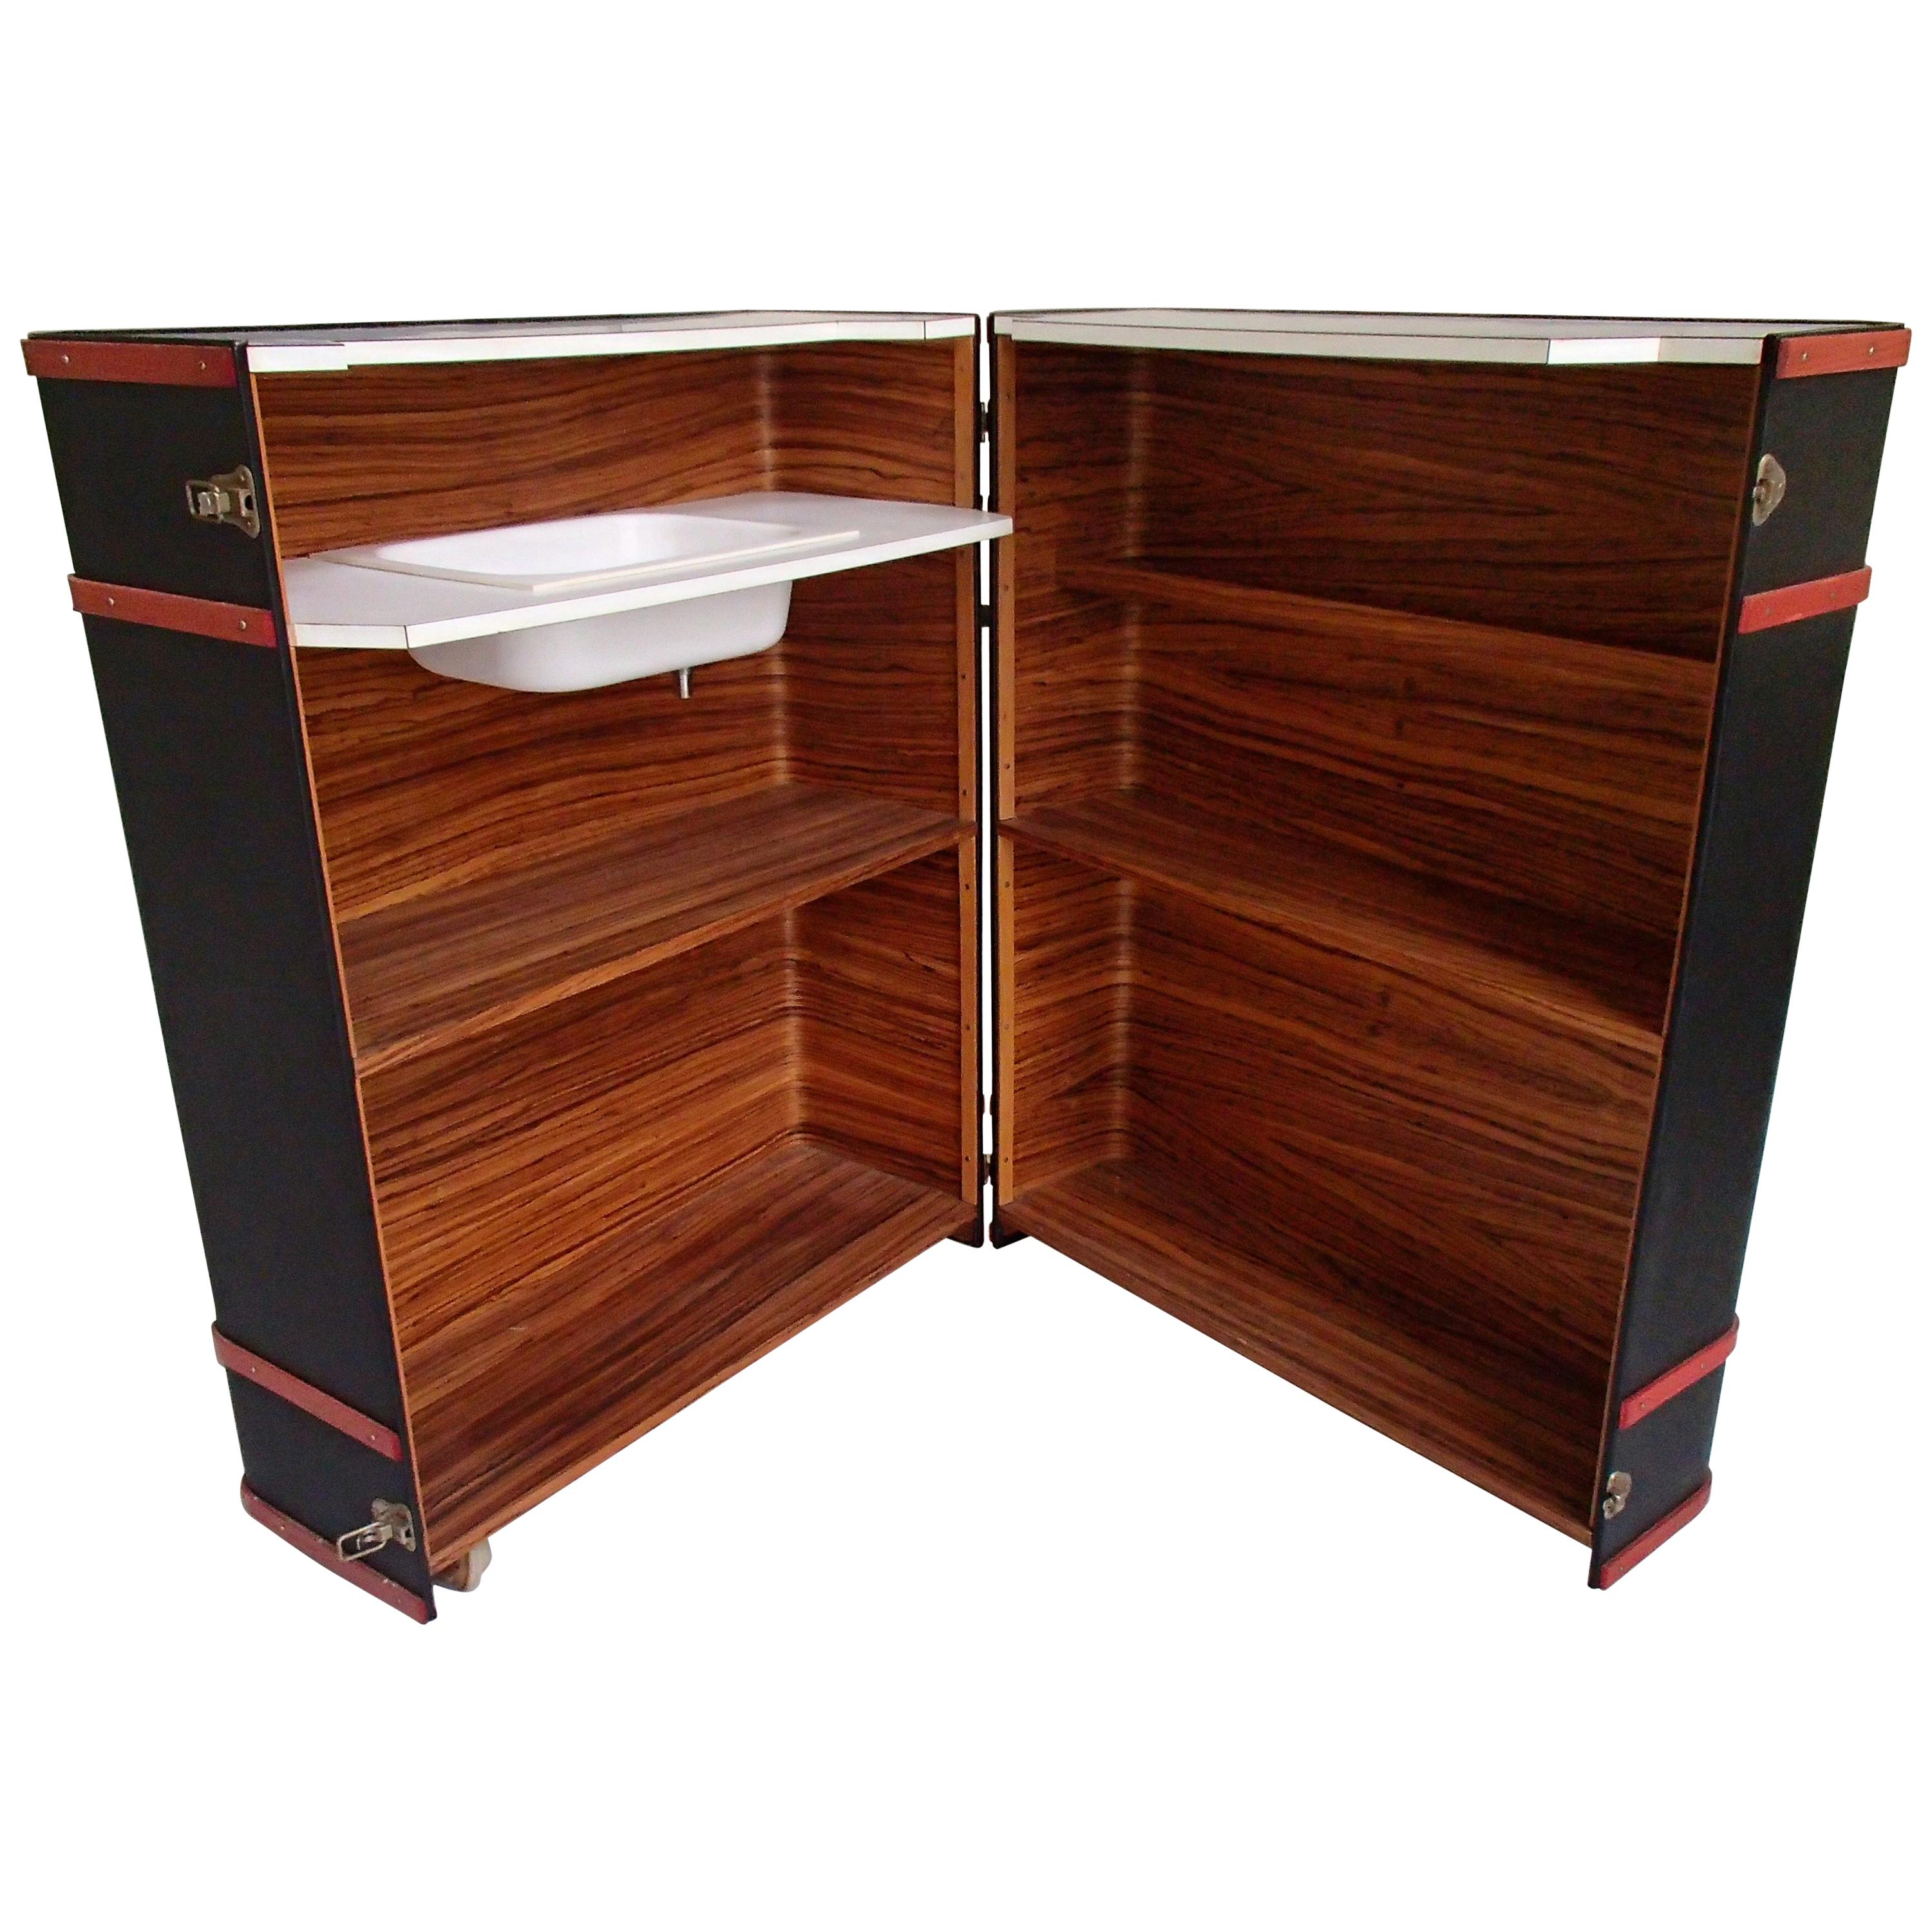 Modern Trunk Bar Black and Red with Sink Inside on Wheels